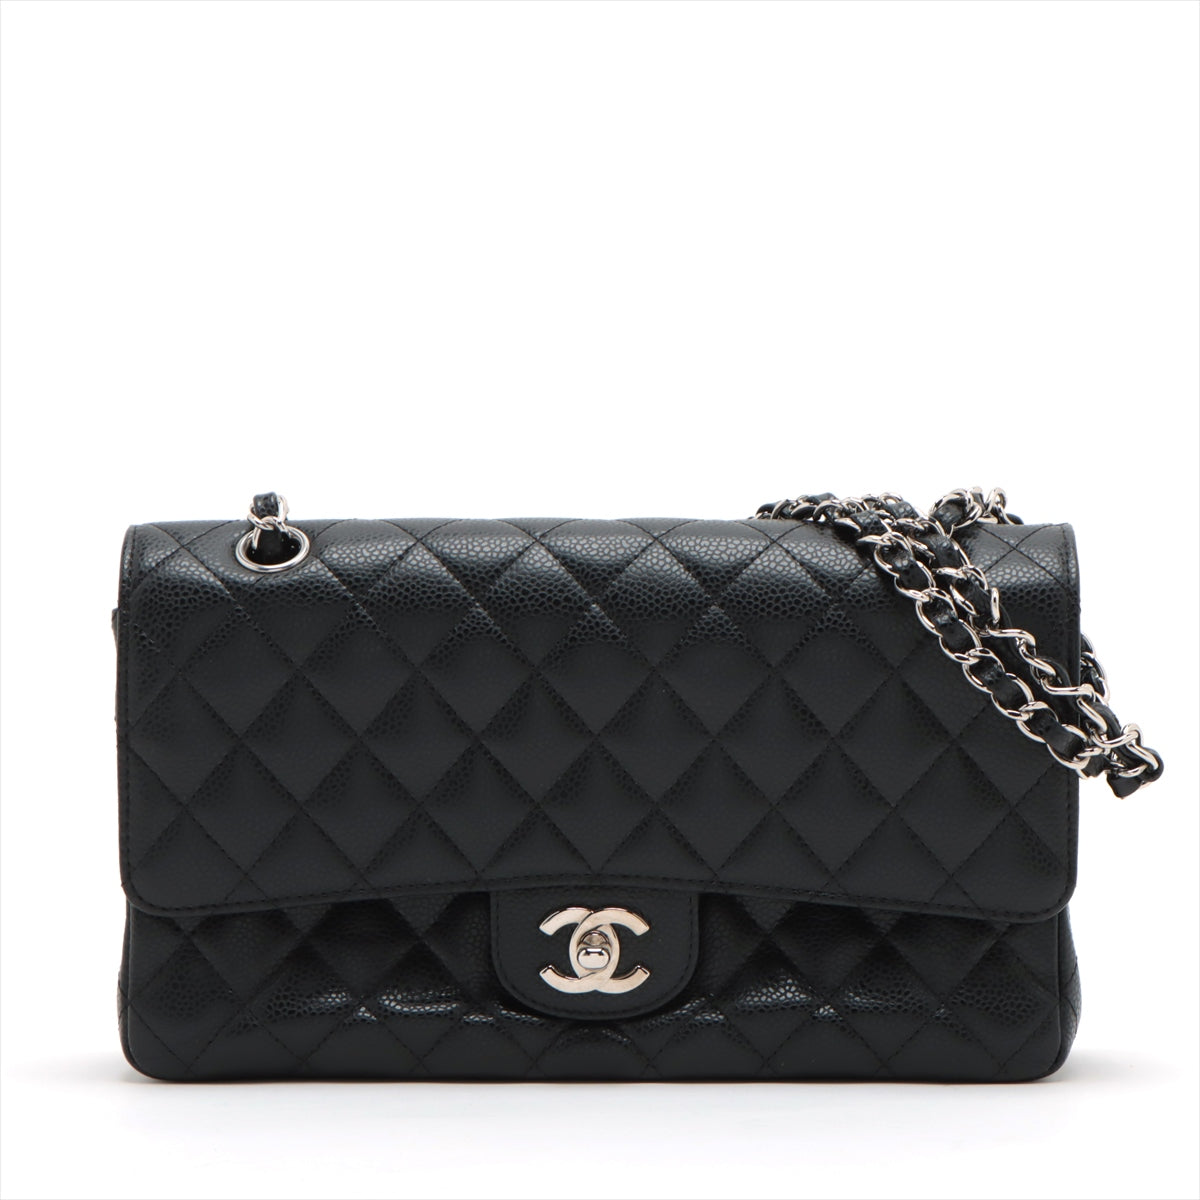 Chanel Matelasse25 Caviarskin Double flap Double chain bag Black Silver Metal fittings 13XXXXXX A01112